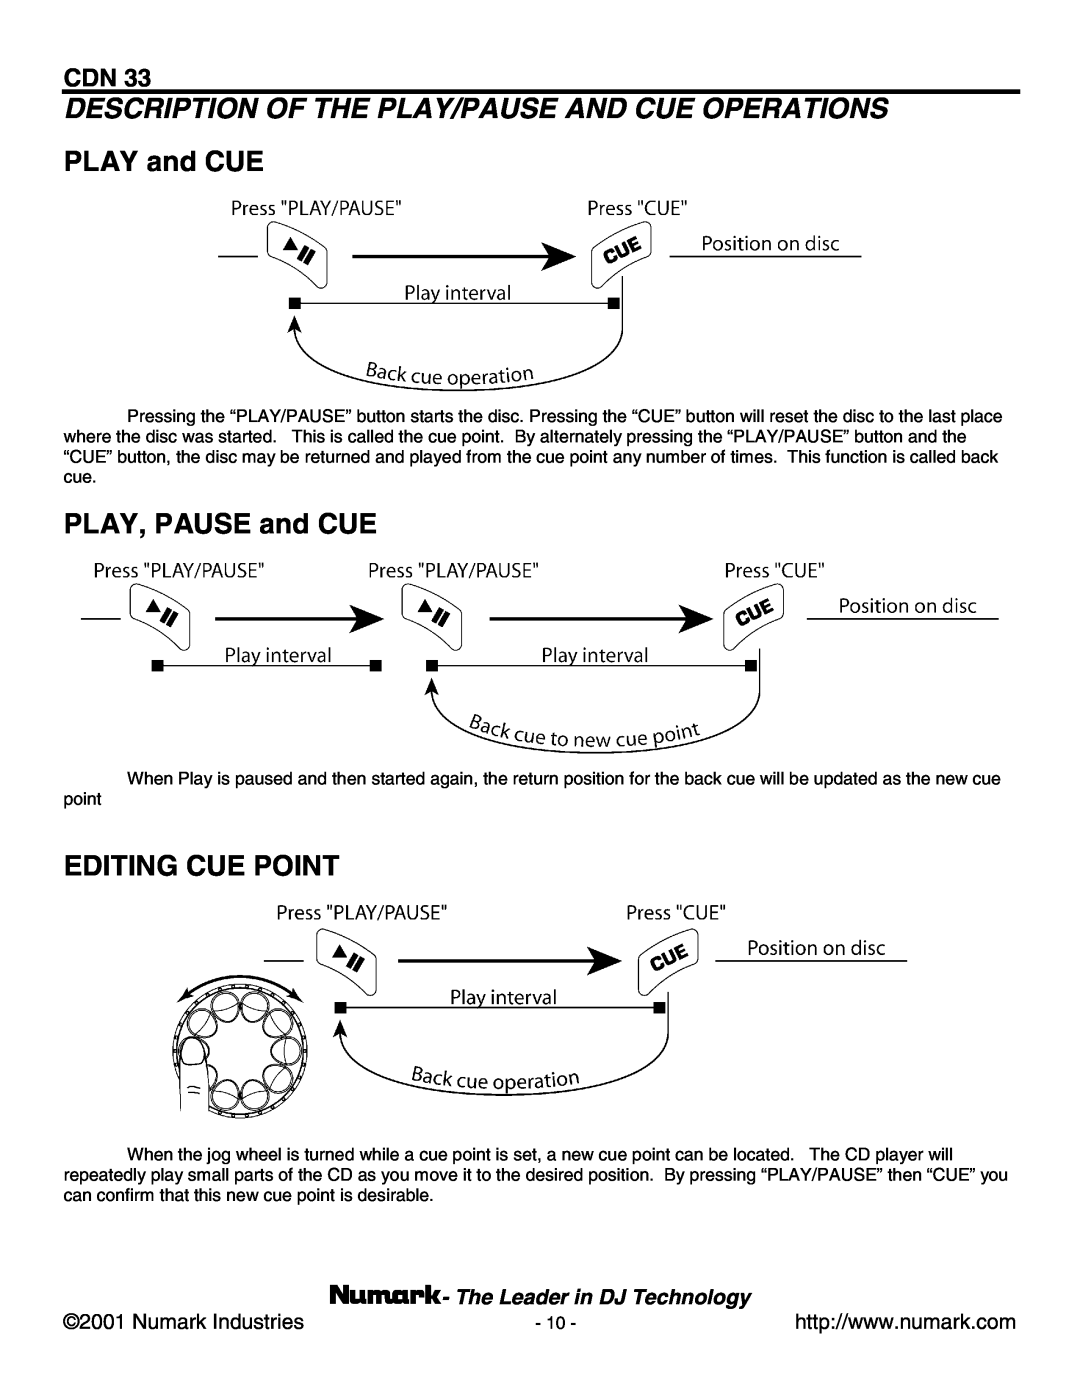 Numark Industries CDN 33 manual Description Of The Play/Pause And Cue Operations, PLAY and CUE, PLAY, PAUSE and CUE 